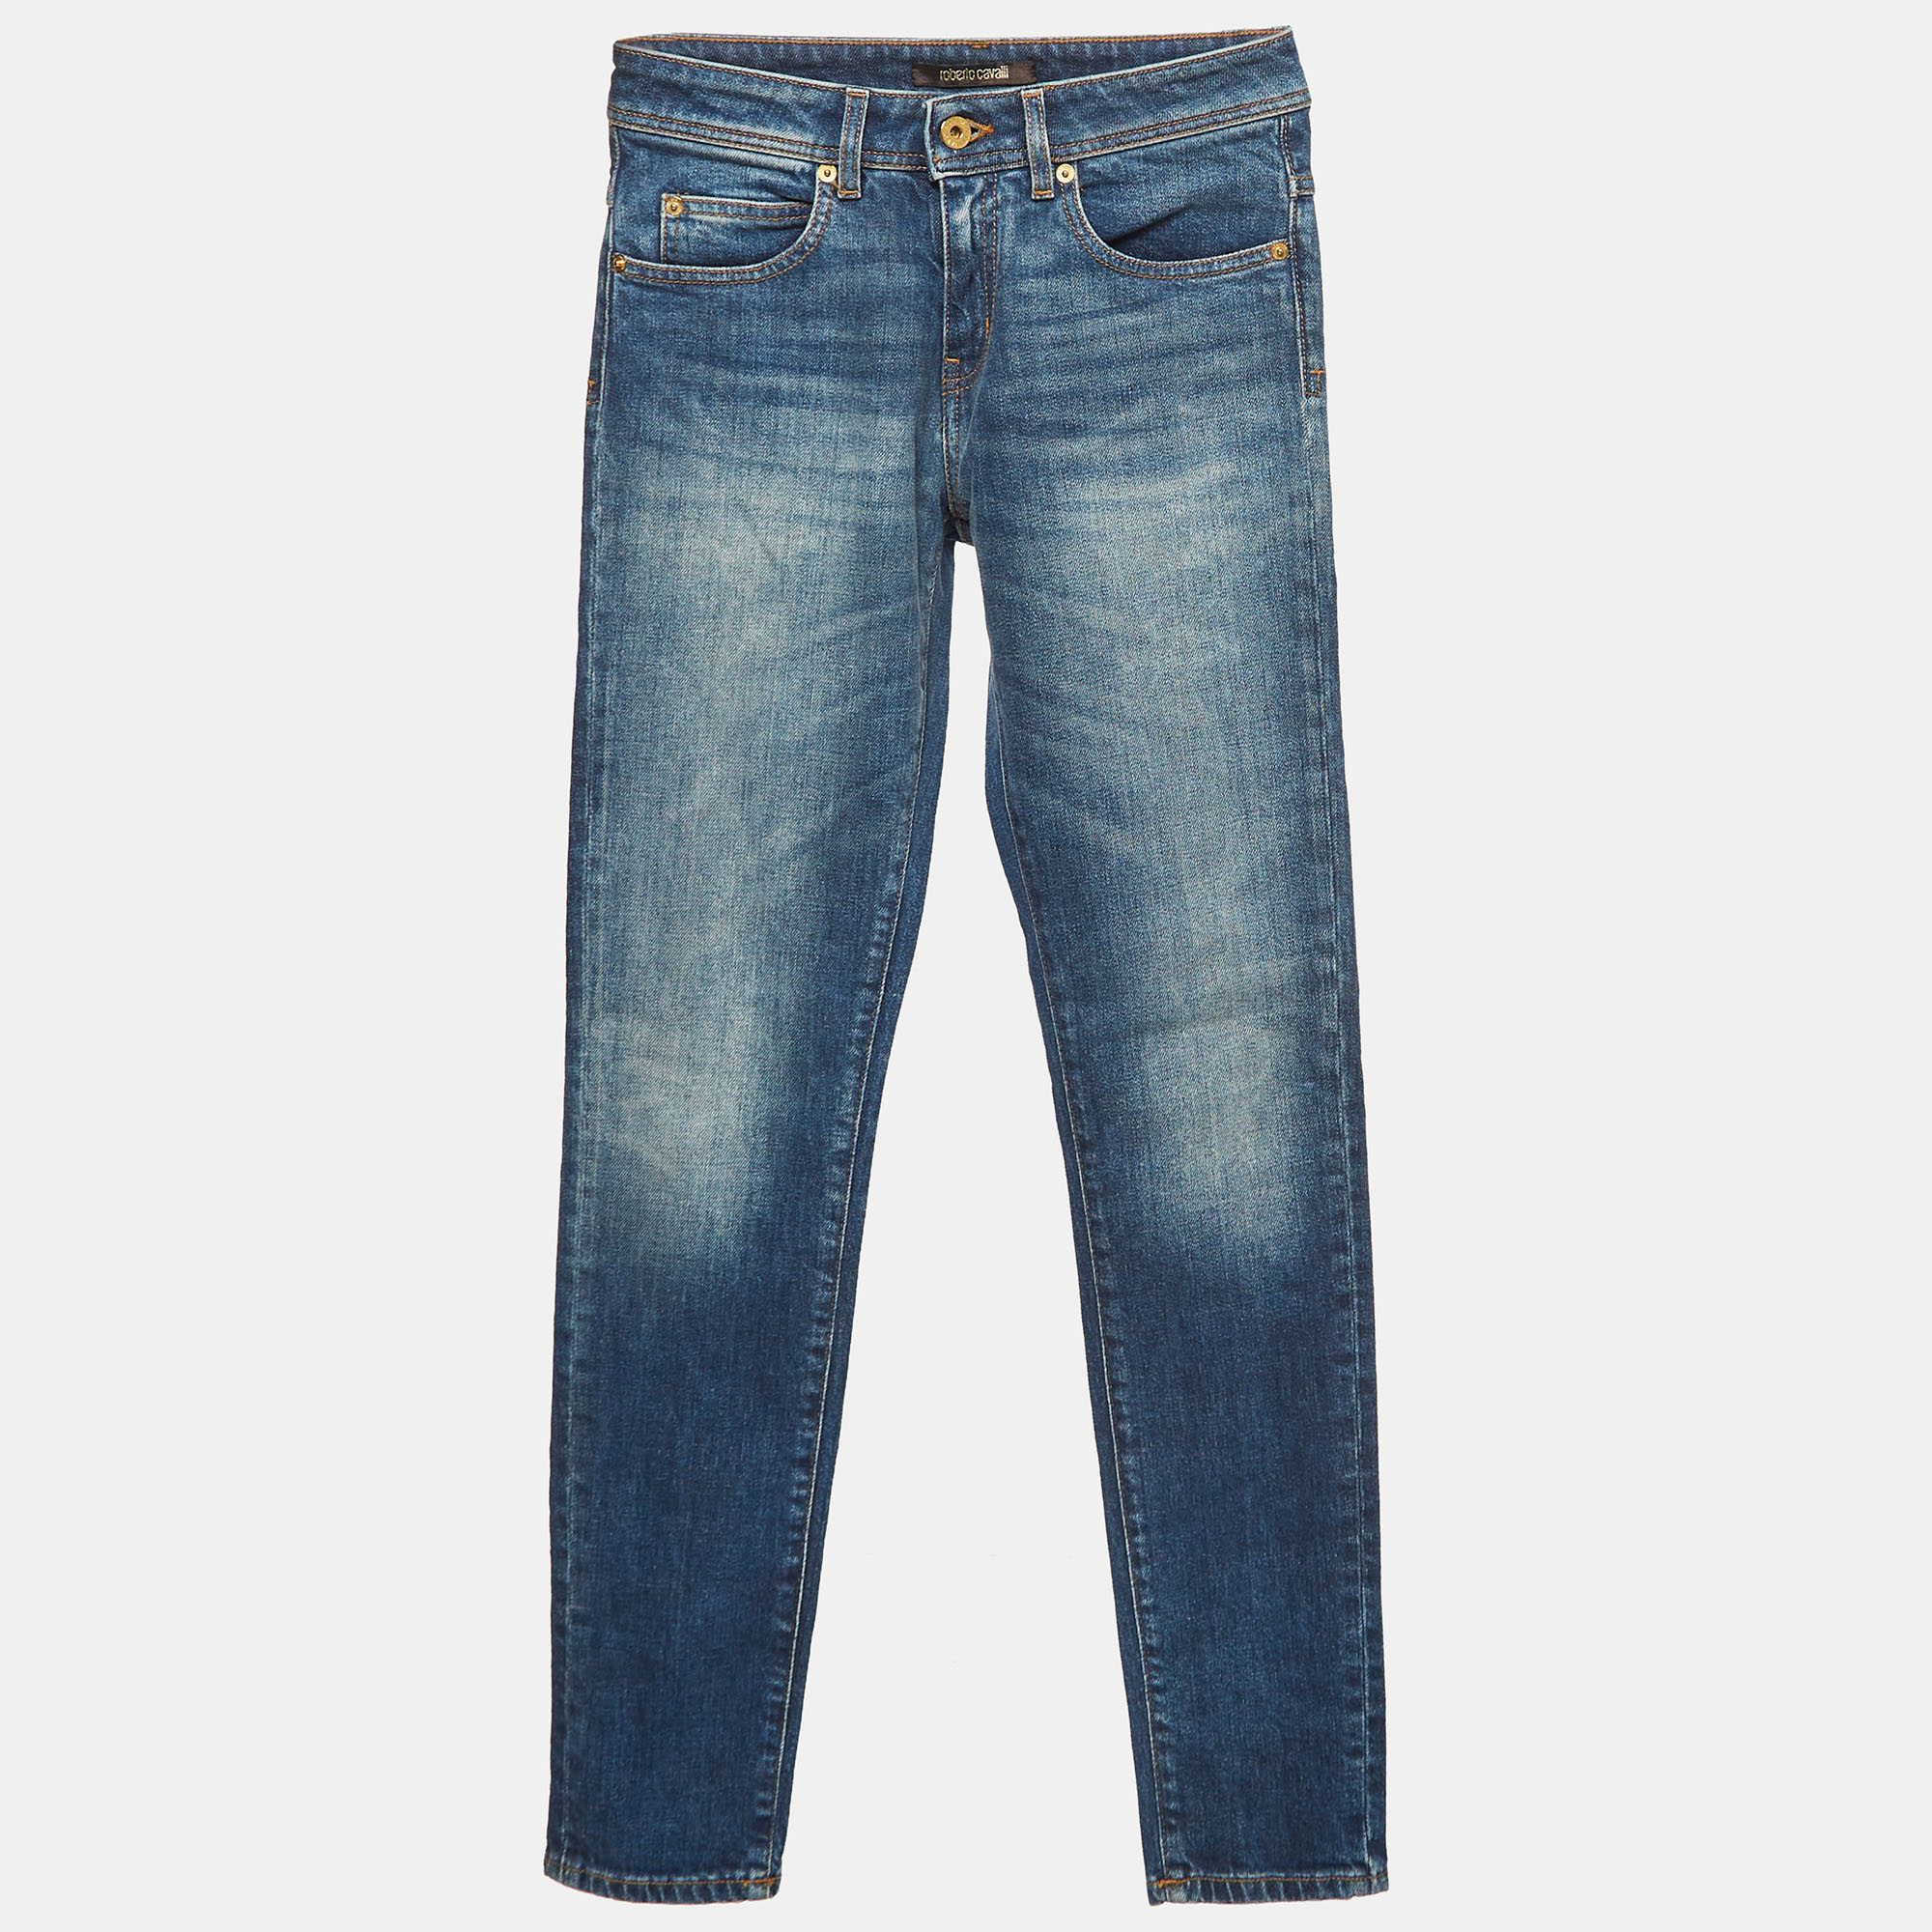 These Roberto Cavalli jeans are a must have wardrobe essential. These blue skinny jeans can be dressed both up and down for looks that are either casual and comfy or chic and fashionable.